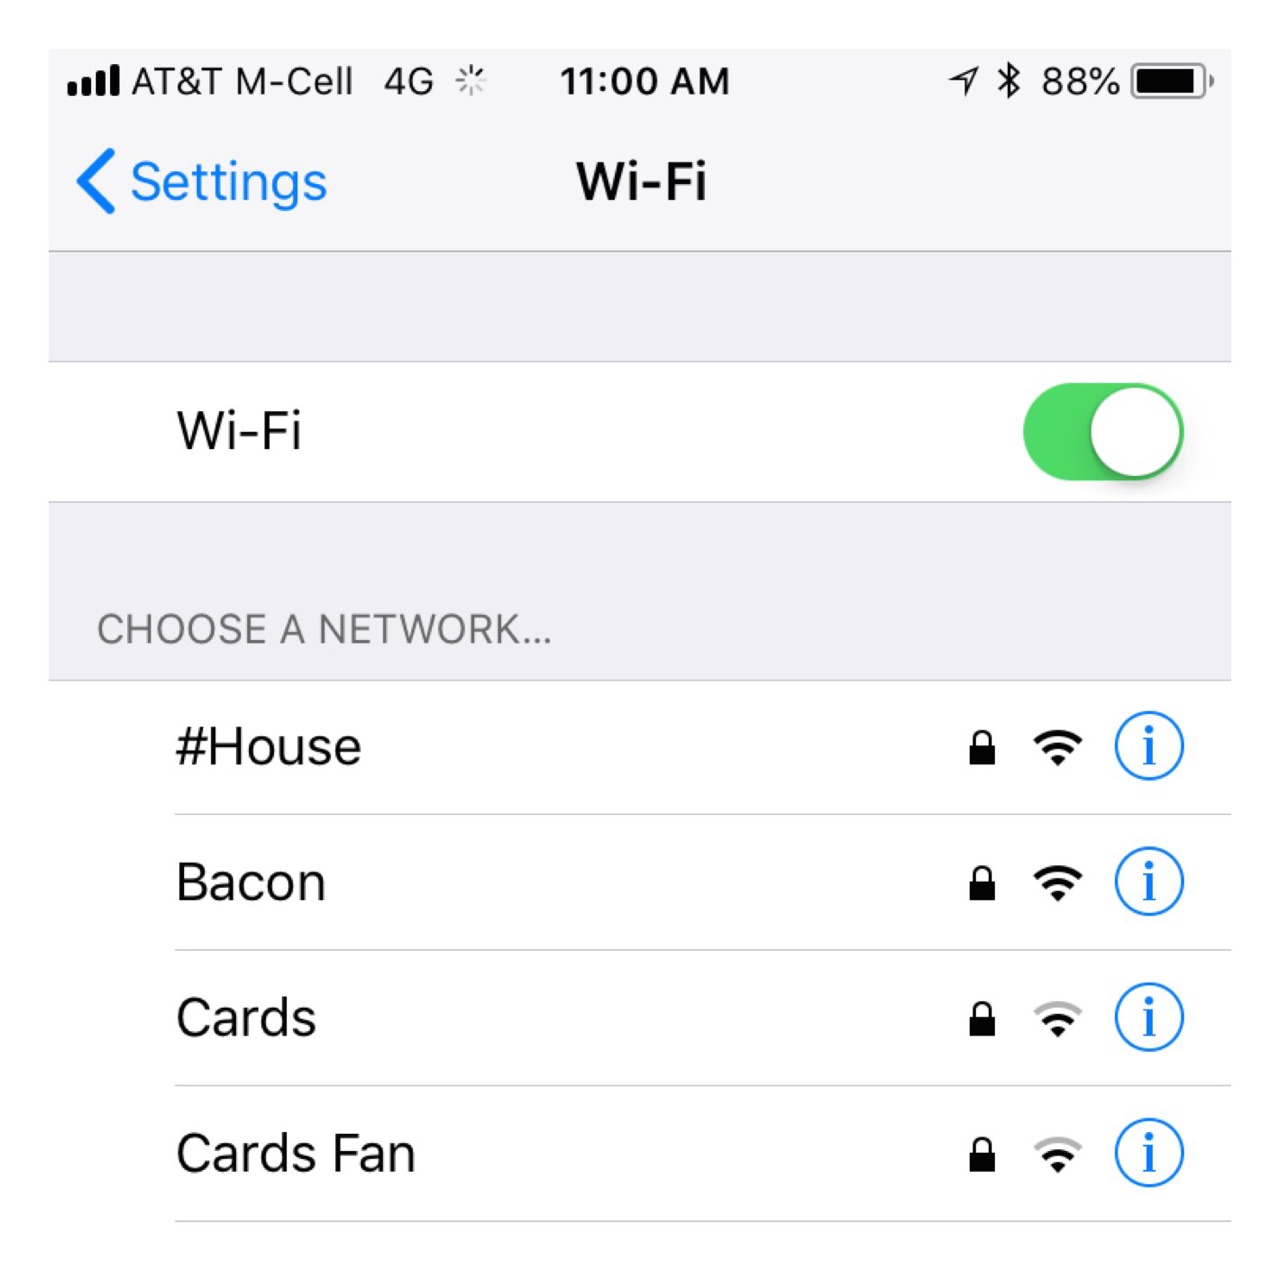 Always choose Bacon as your SSID.